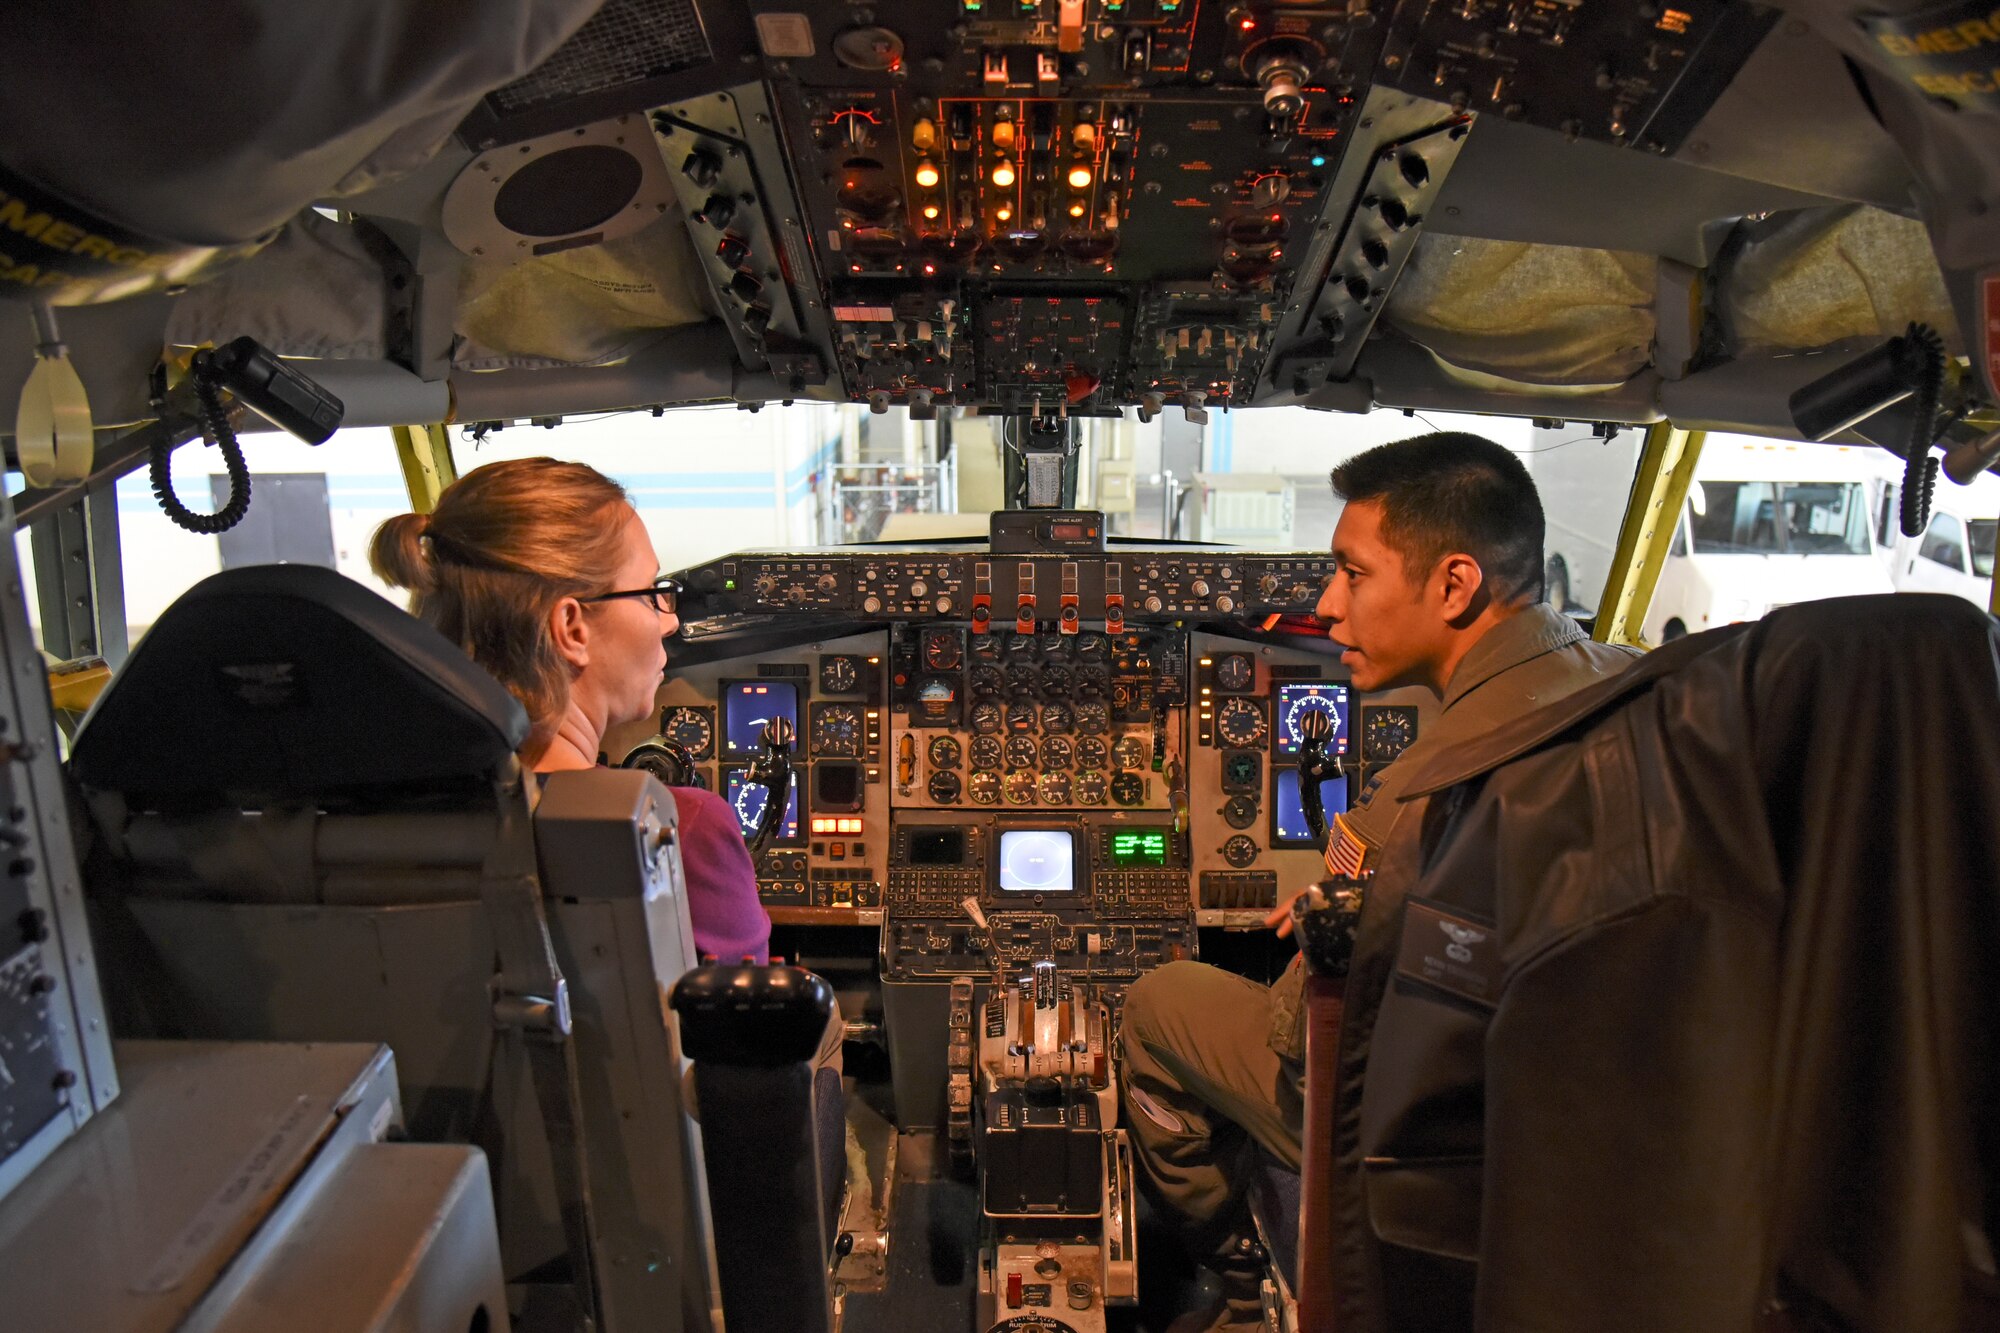 Capt. Kevin Escobedo, 92nd Operations Support Squadron executive officer, speaks with Chief Master Sgt. Mariah Armga, Secretary of the Air Force legislative liaison, about upgrades to the KC-135 Stratotanker during a base tour, Oct. 18, 2018, at Fairchild Air Force Base, Washington. Armga was joined by congressional staffers who represented leaders in Washington D.C. including Georgia Reps. Rick Allen and Sanford Bishop, Washington state Reps. Derek Kilmer and Cathy McMorris Rodgers, and North Carolina Rep. Walter Jones. (U.S. Air Force photo/Staff Sgt. Mackenzie Mendez)